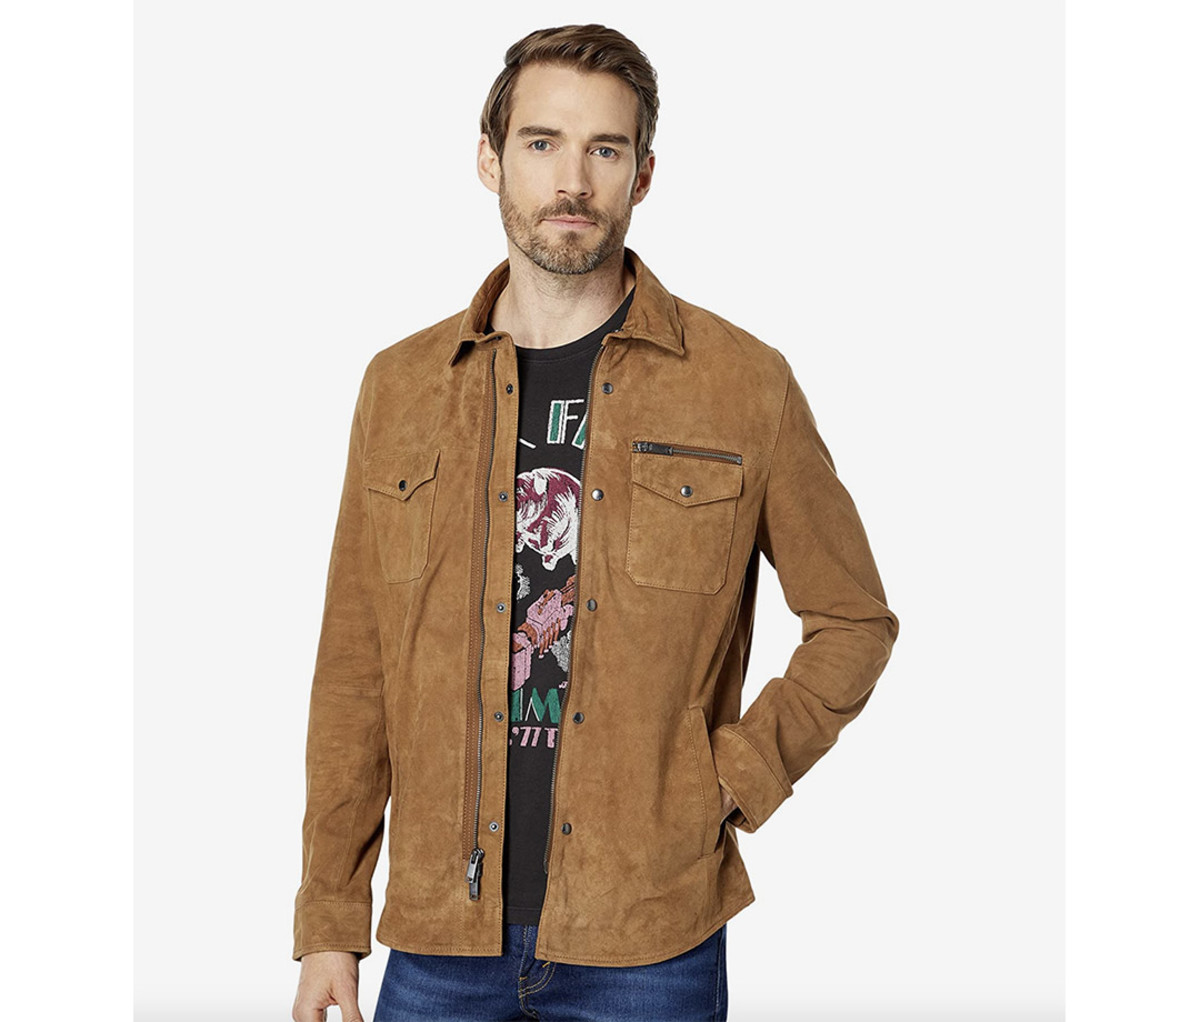 This John Varvatos Suede Jacket is Gonna Make Your Spring a Stylish One